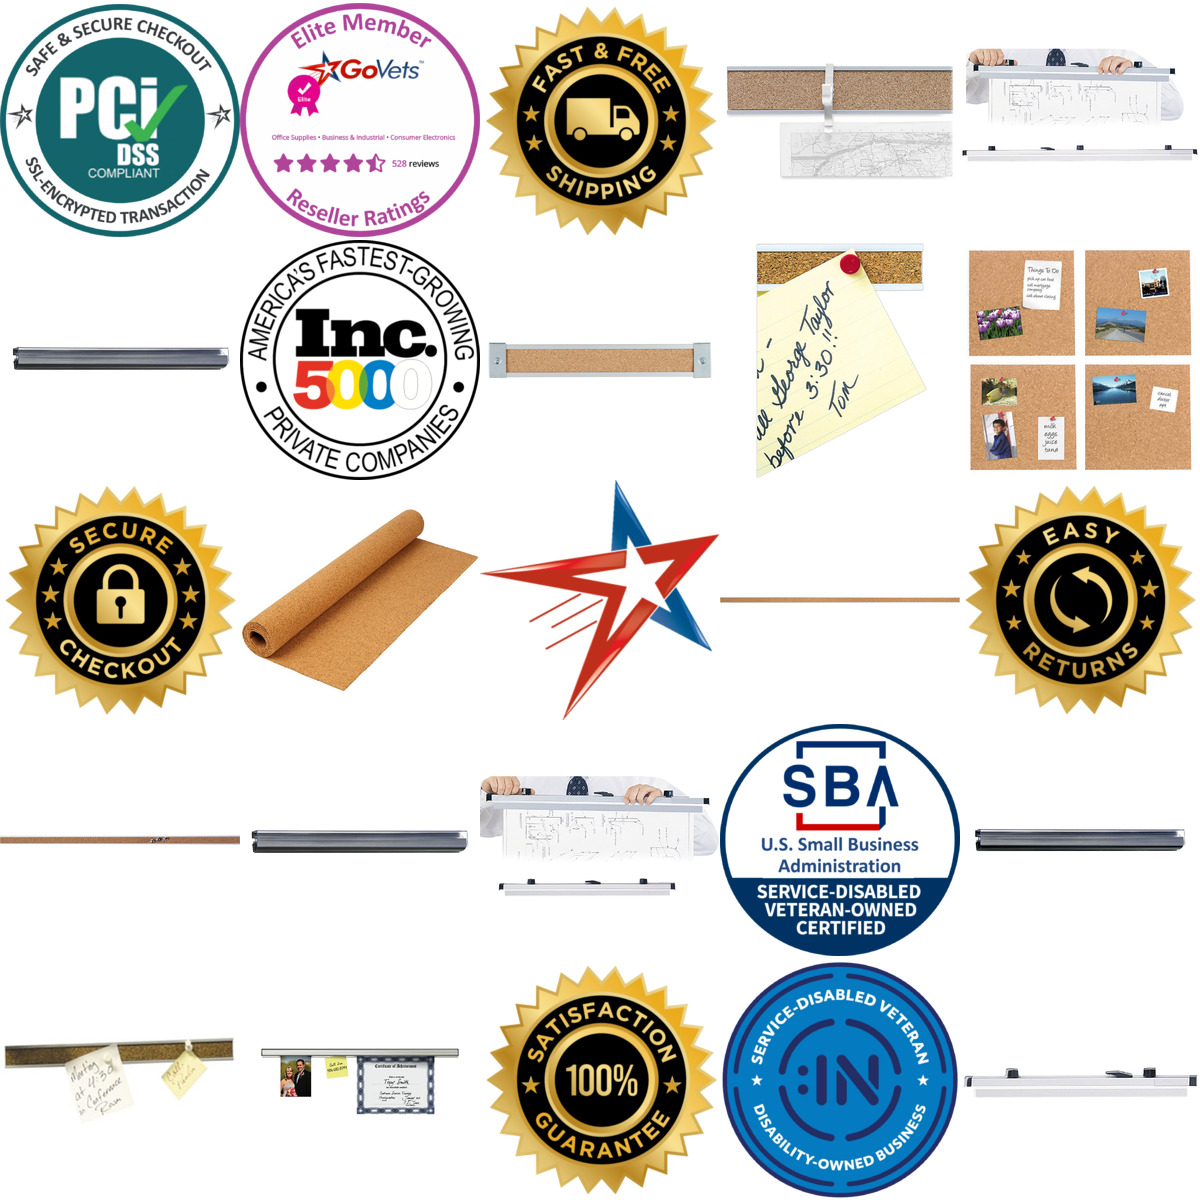 A selection of Message Bars products on GoVets